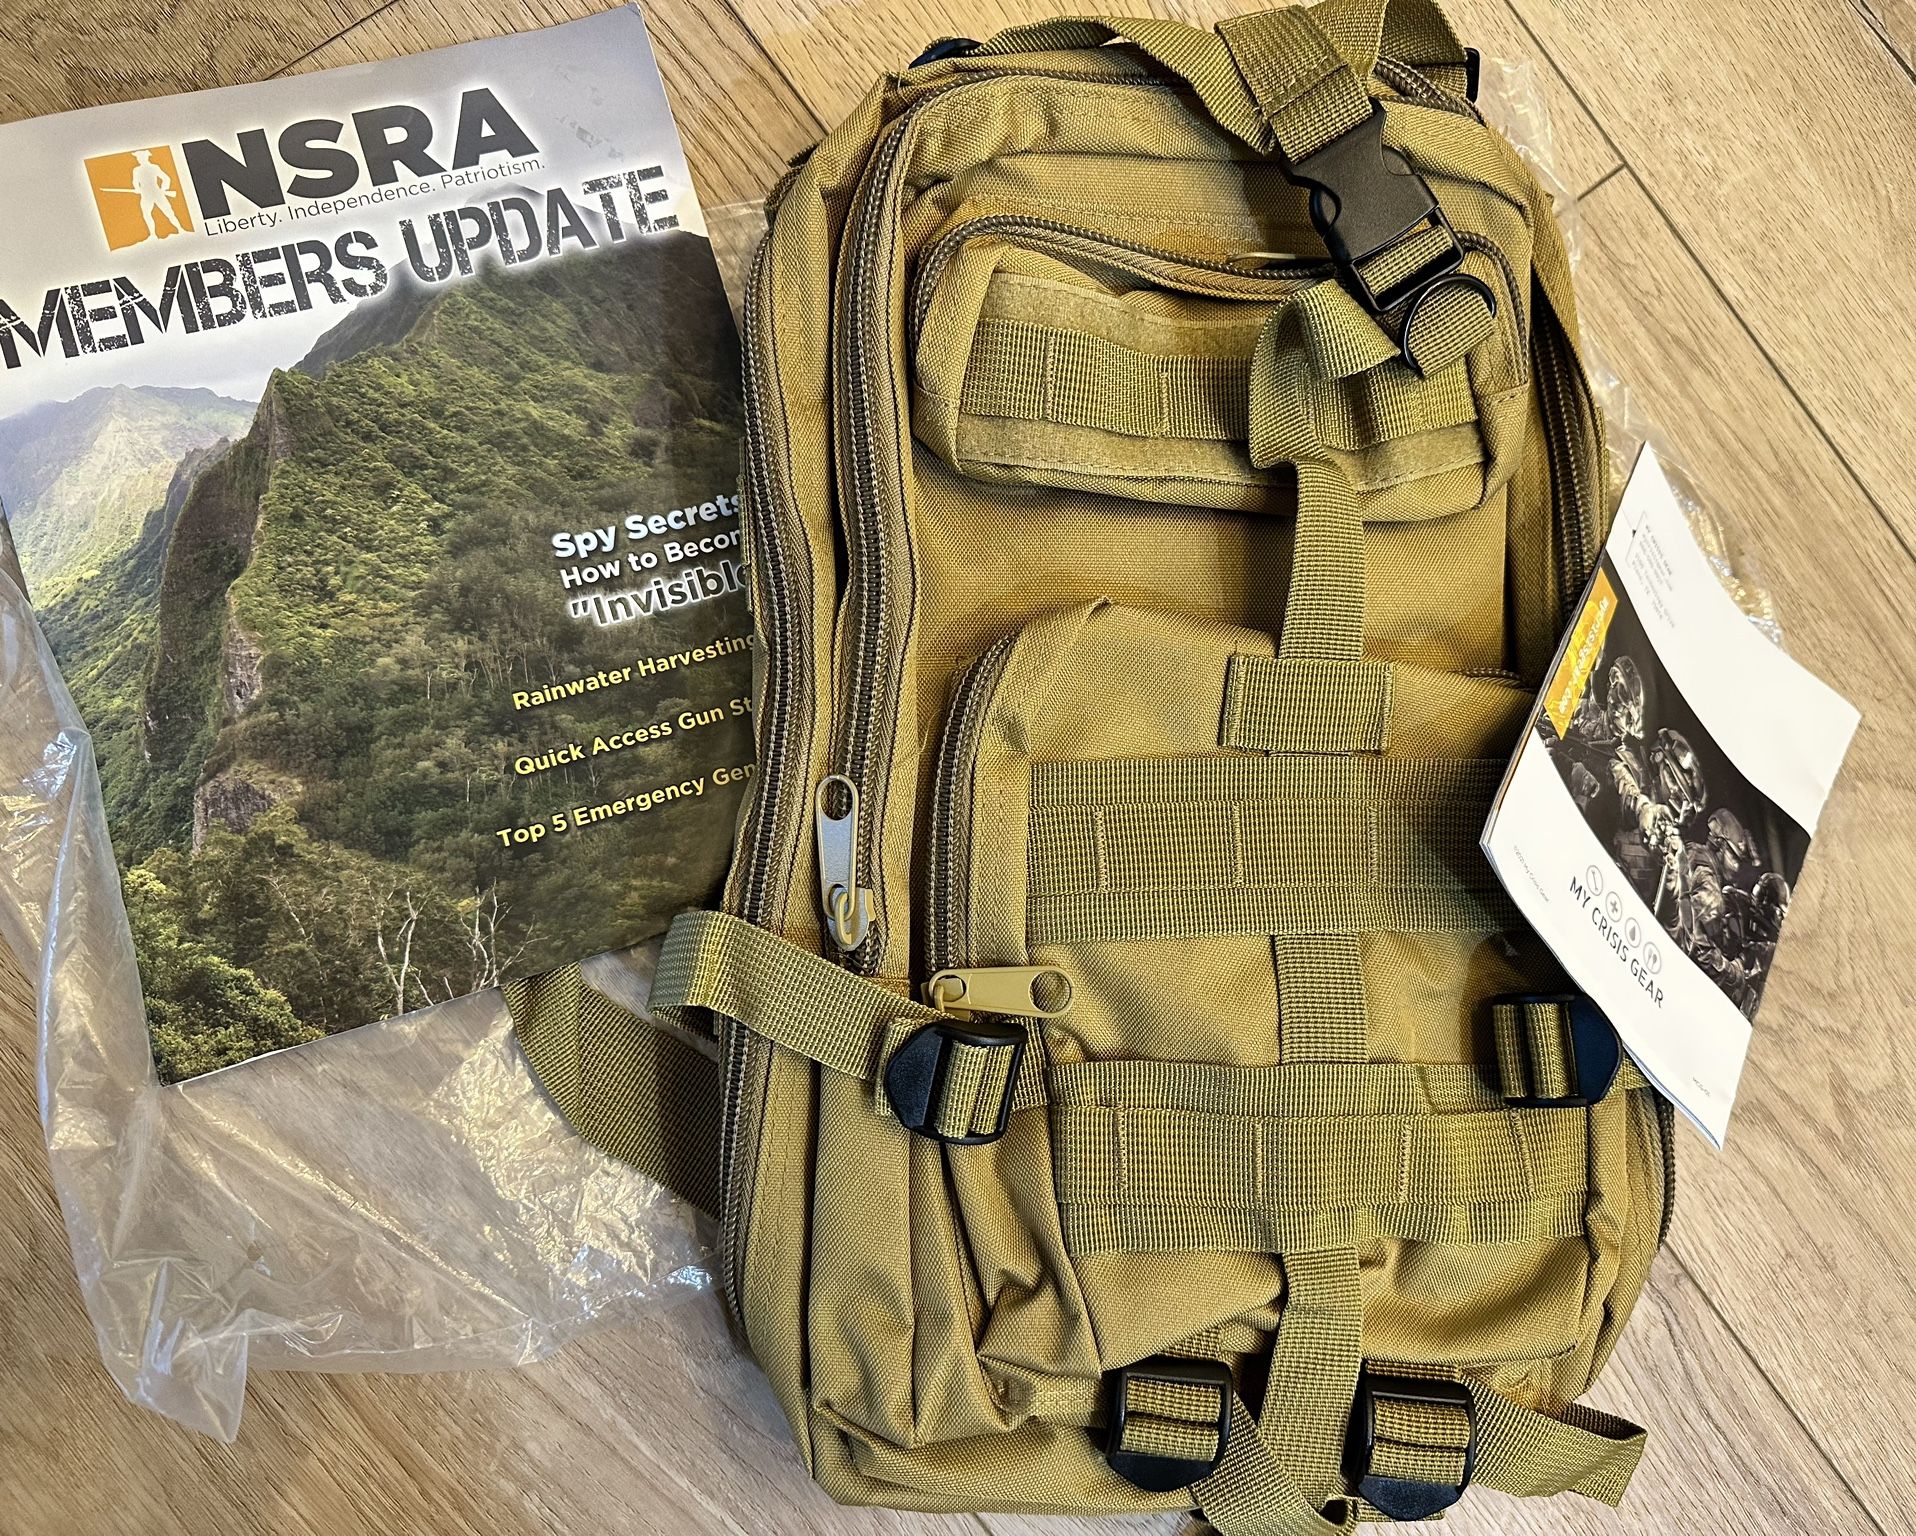 My Crisis Gear Tactical Backpack NWT Catalog & Book Included